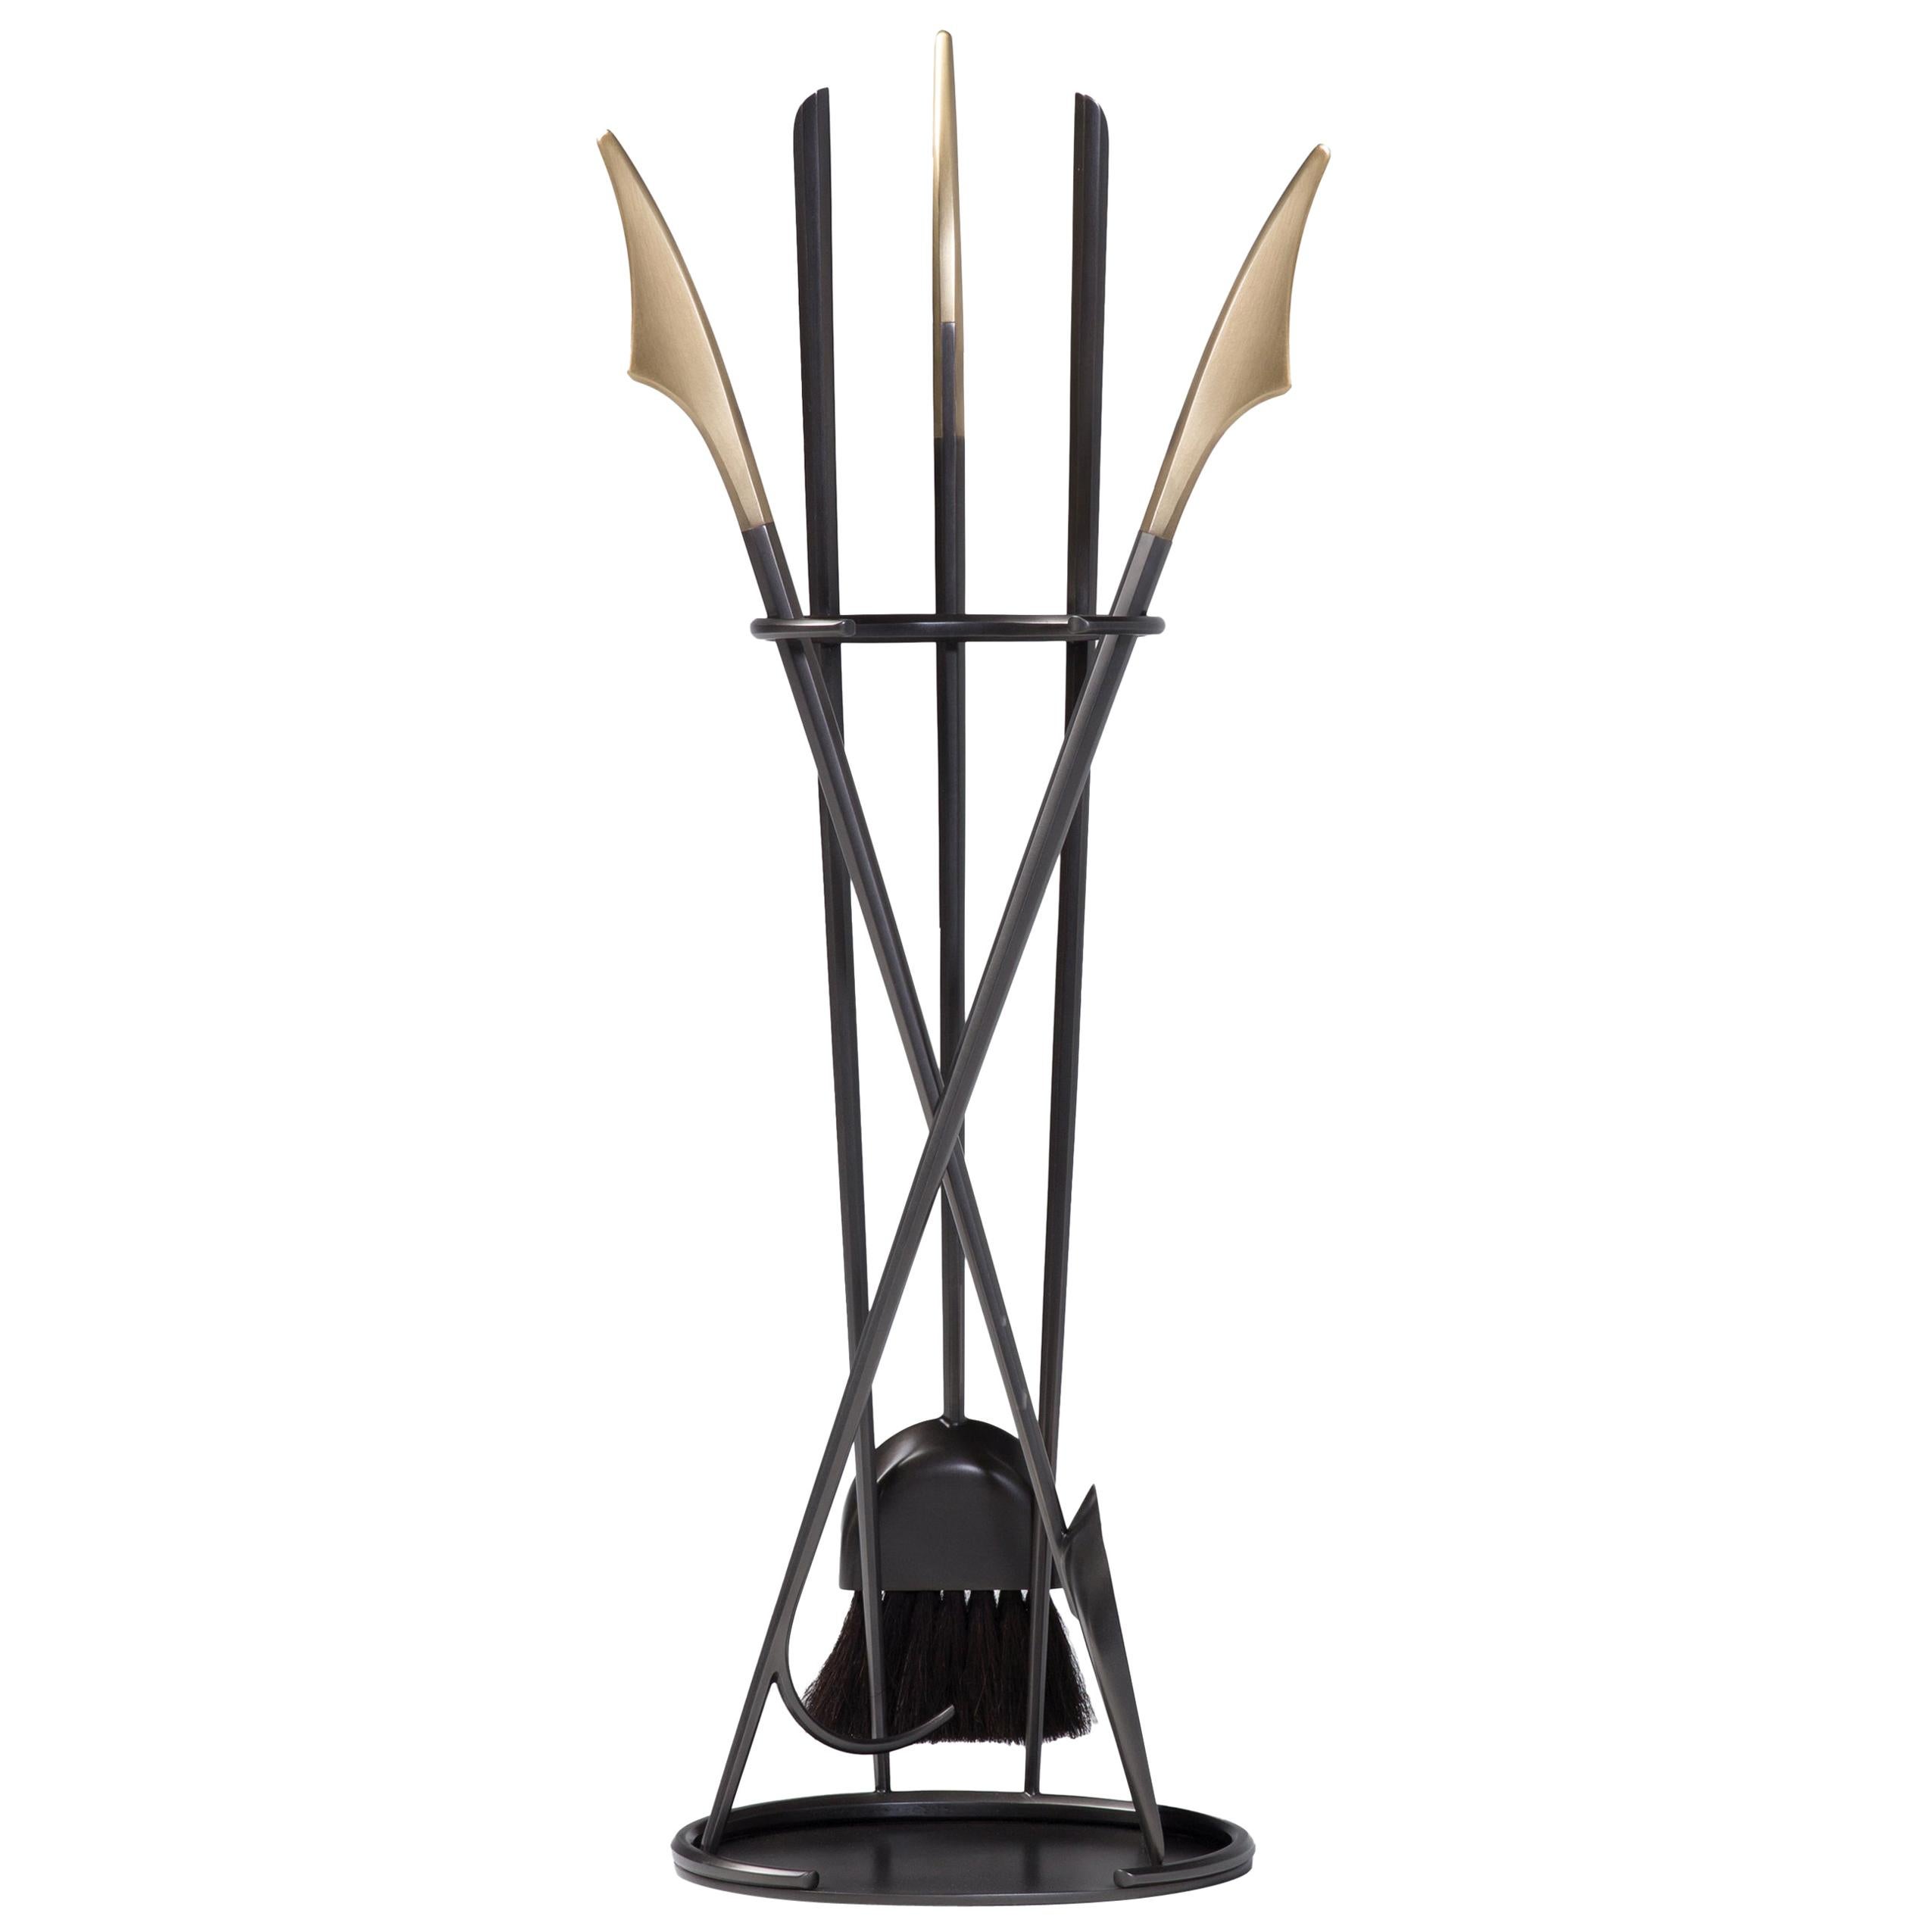 HOLLY HUNT Fiamma Fire Tool Set in Forged Steel with Gunmetal Bronze Finish